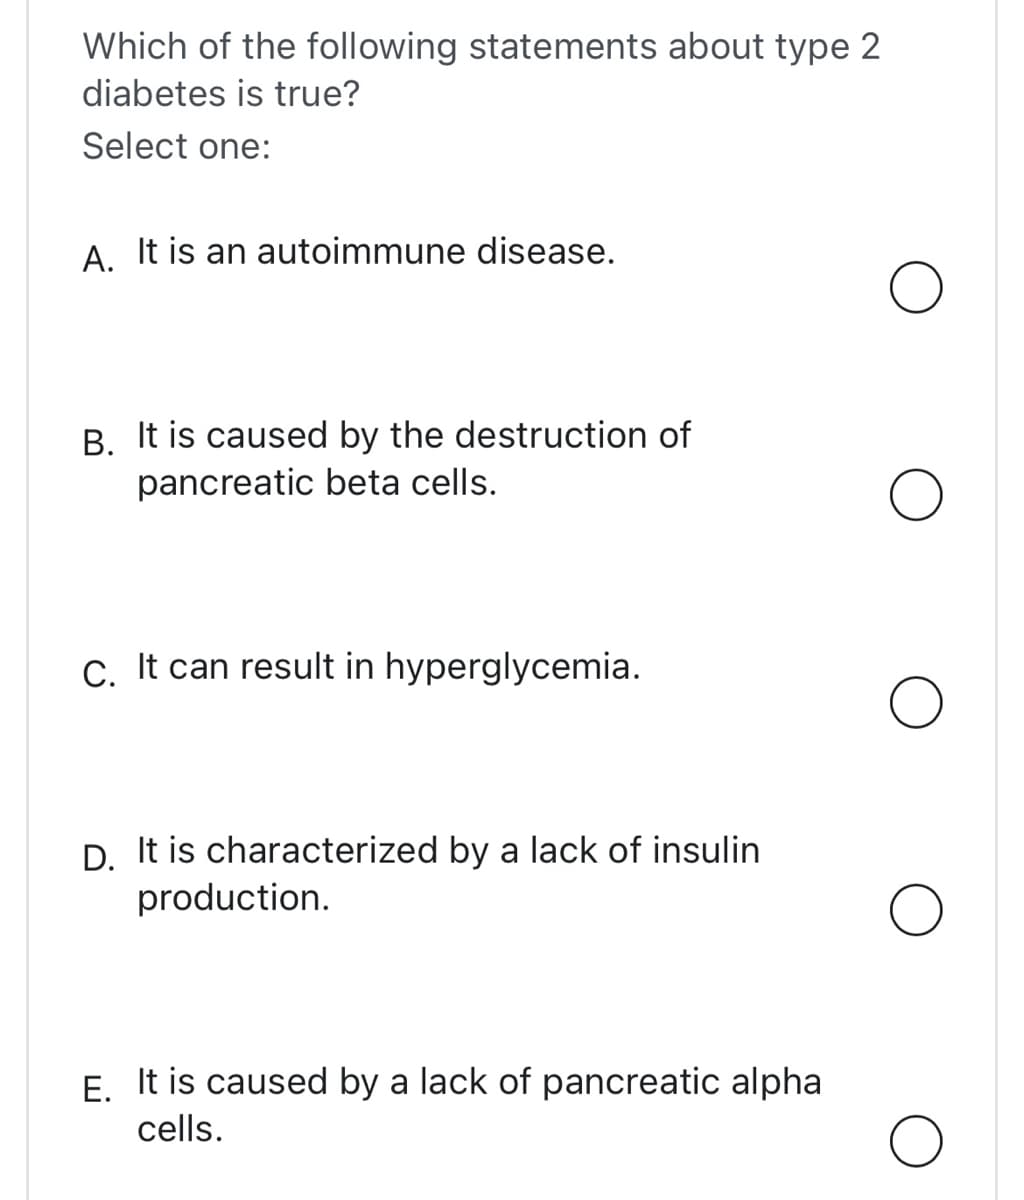 Which of the following statements about type 2
diabetes is true?
Select one:
A. It is an autoimmune disease.
B. It is caused by the destruction of
pancreatic beta cells.
C. It can result in hyperglycemia.
D. It is characterized by a lack of insulin
production.
E. It is caused by a lack of pancreatic alpha
cells.
O